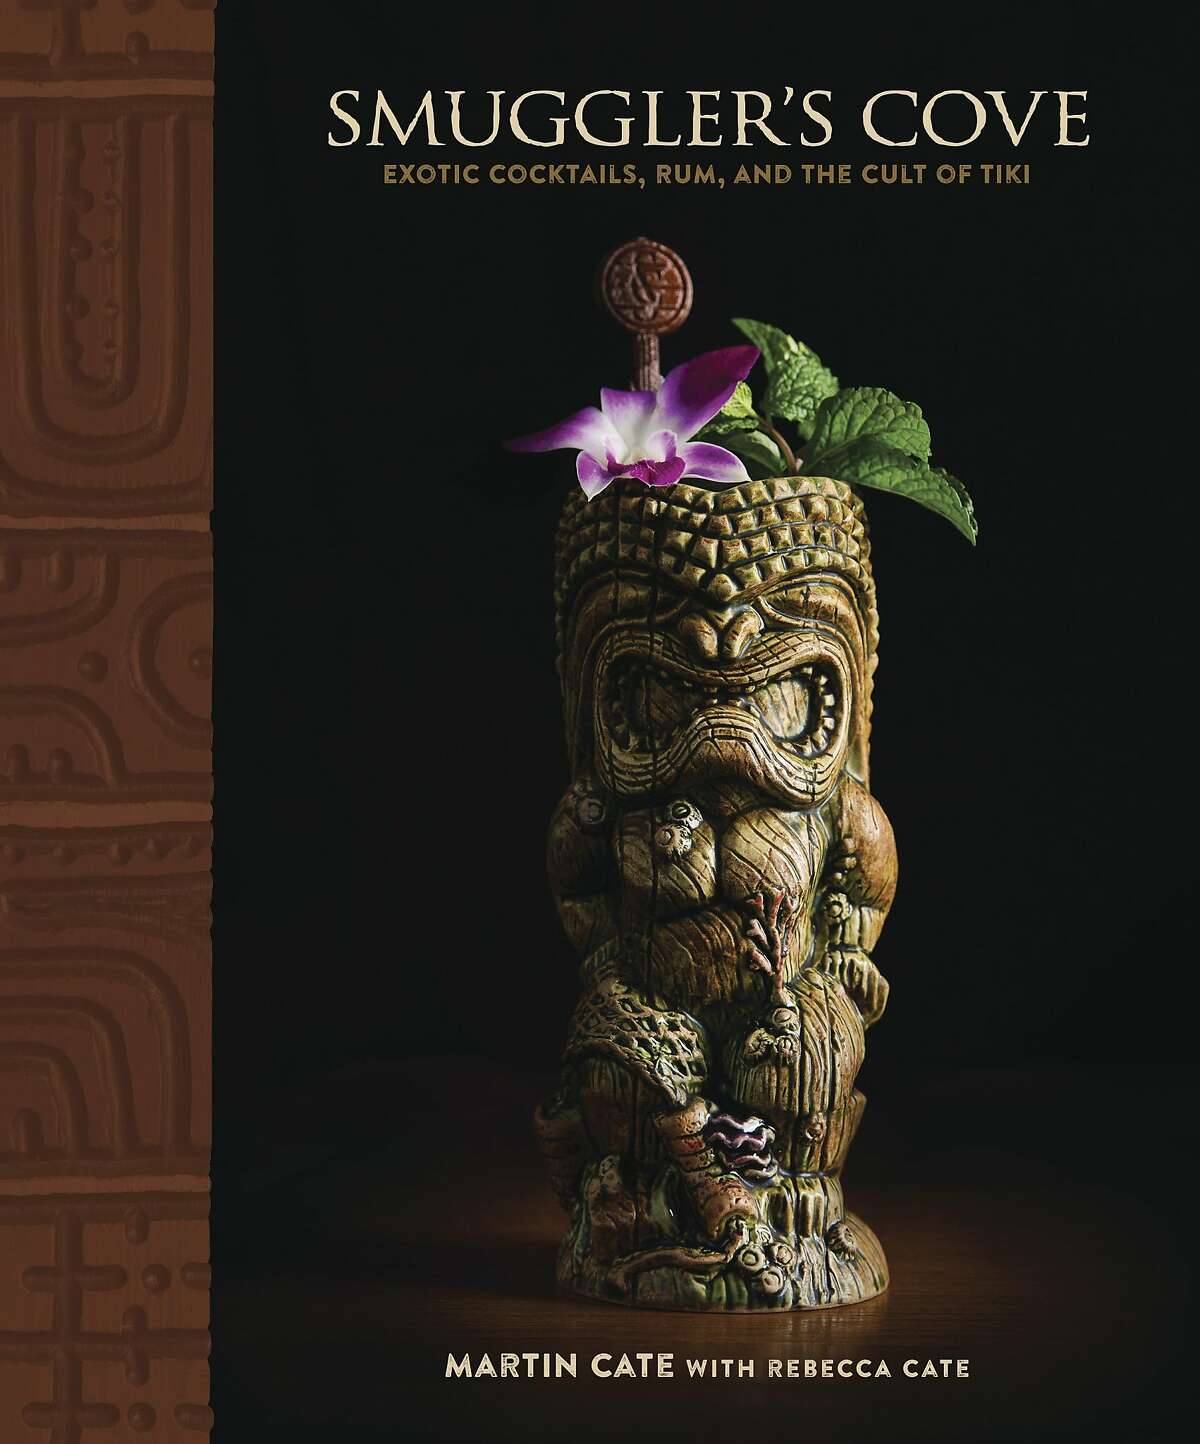 Smuggler's Cove: Exotic Cocktails, Rum, and the Cult of Tiki by Martin Cate (Author), Rebecca Cate (Author)